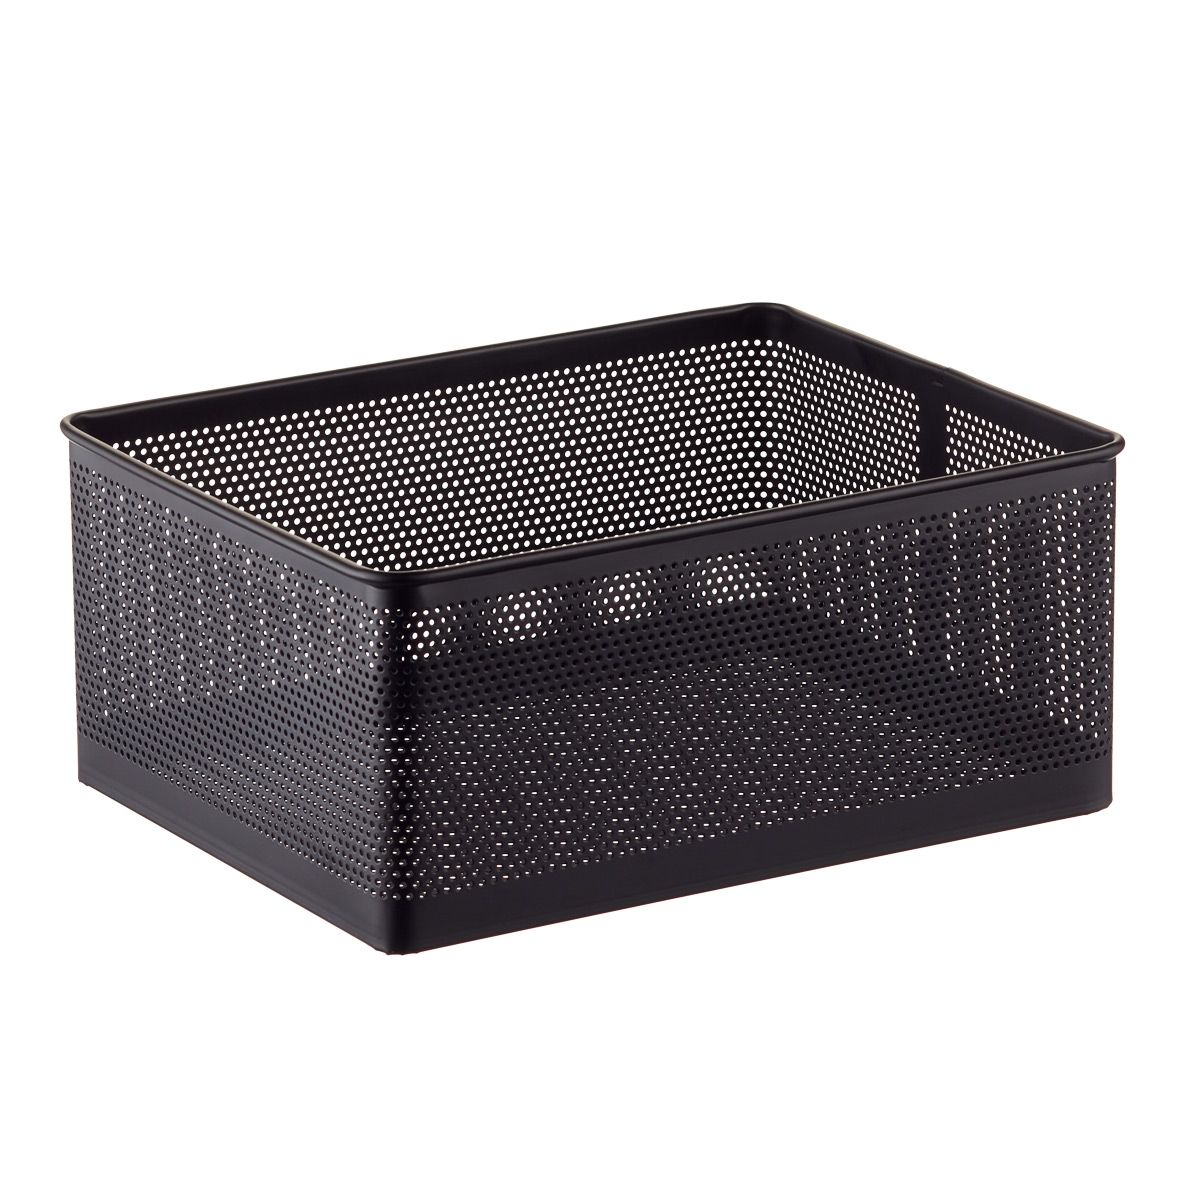 Serena Stamped Metal Bins | The Container Store